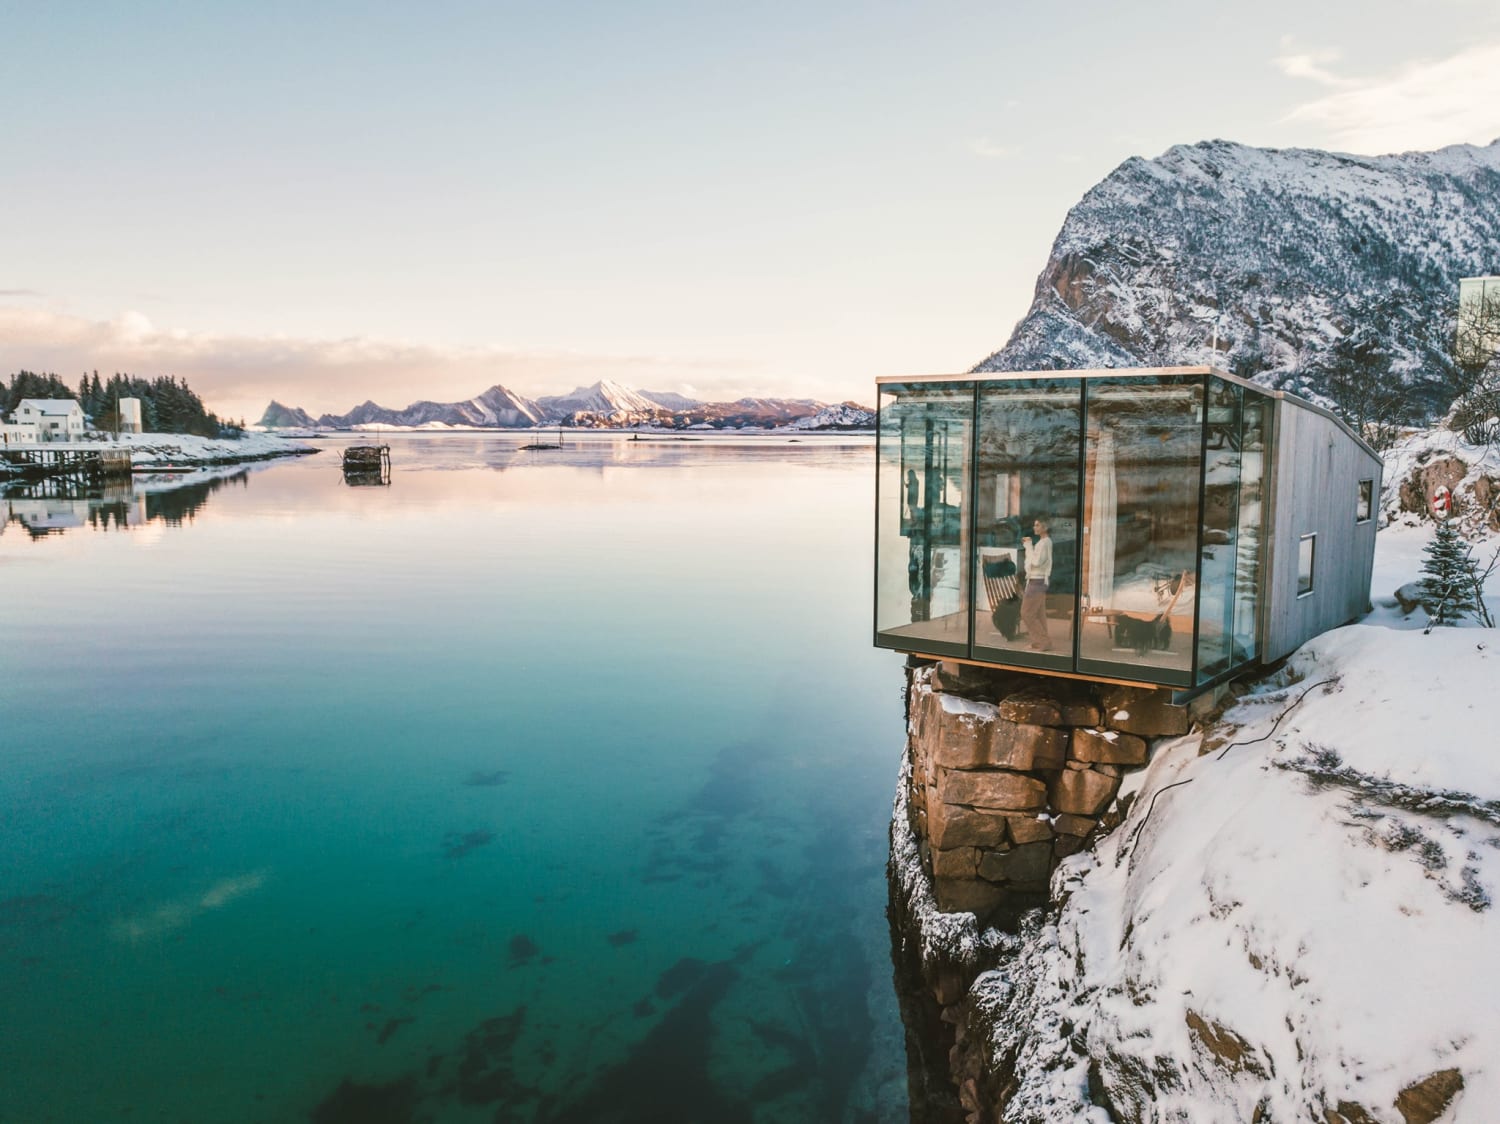 These are the 'Seacabins', a resort hotel on Manshausen Island, northern Norway.